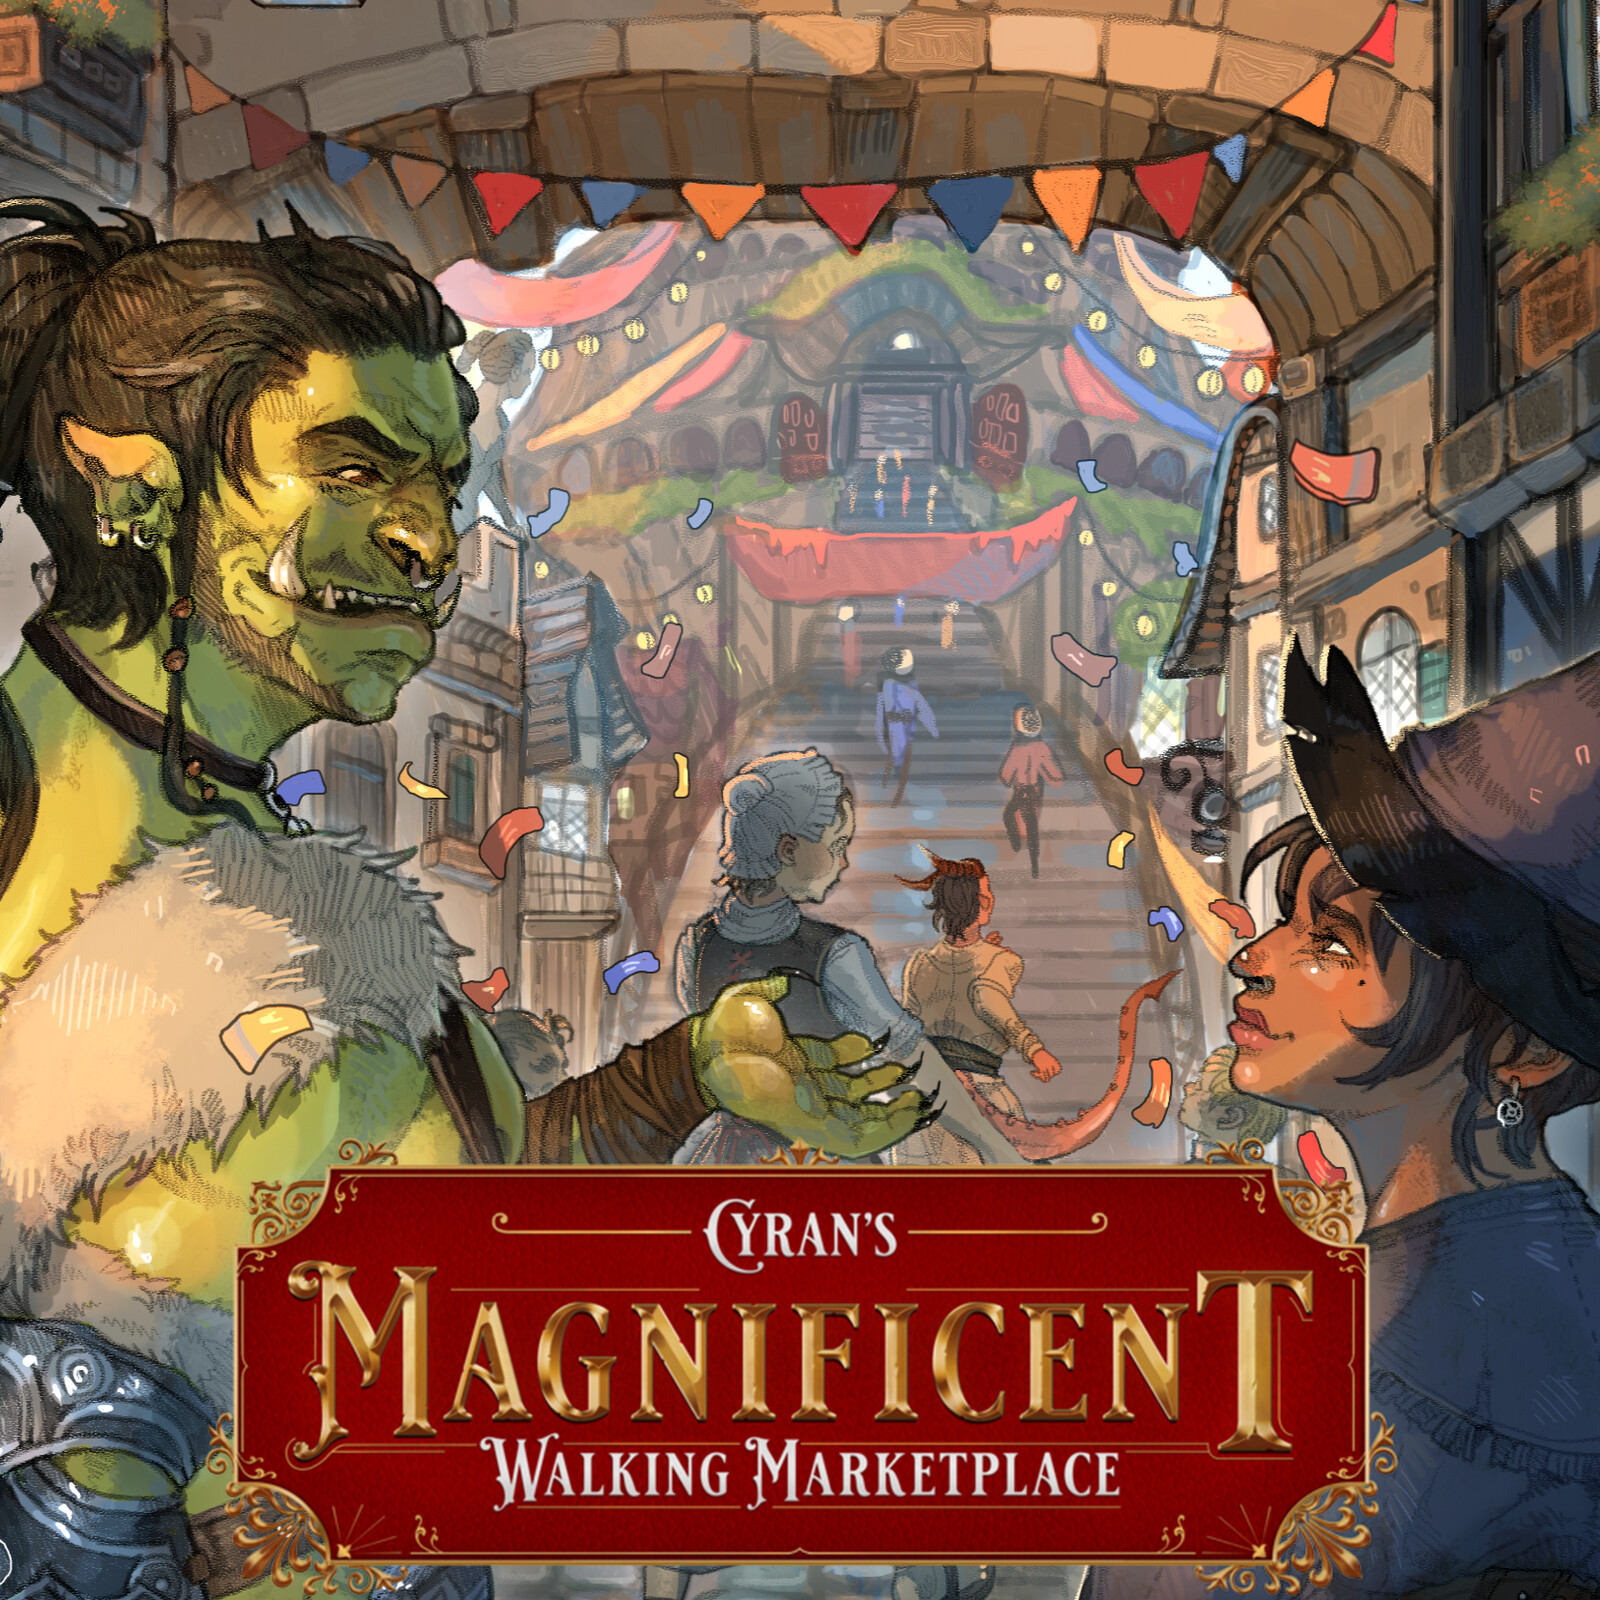 Coming to Town「Cyran's Magnificent Walking Marketplace」